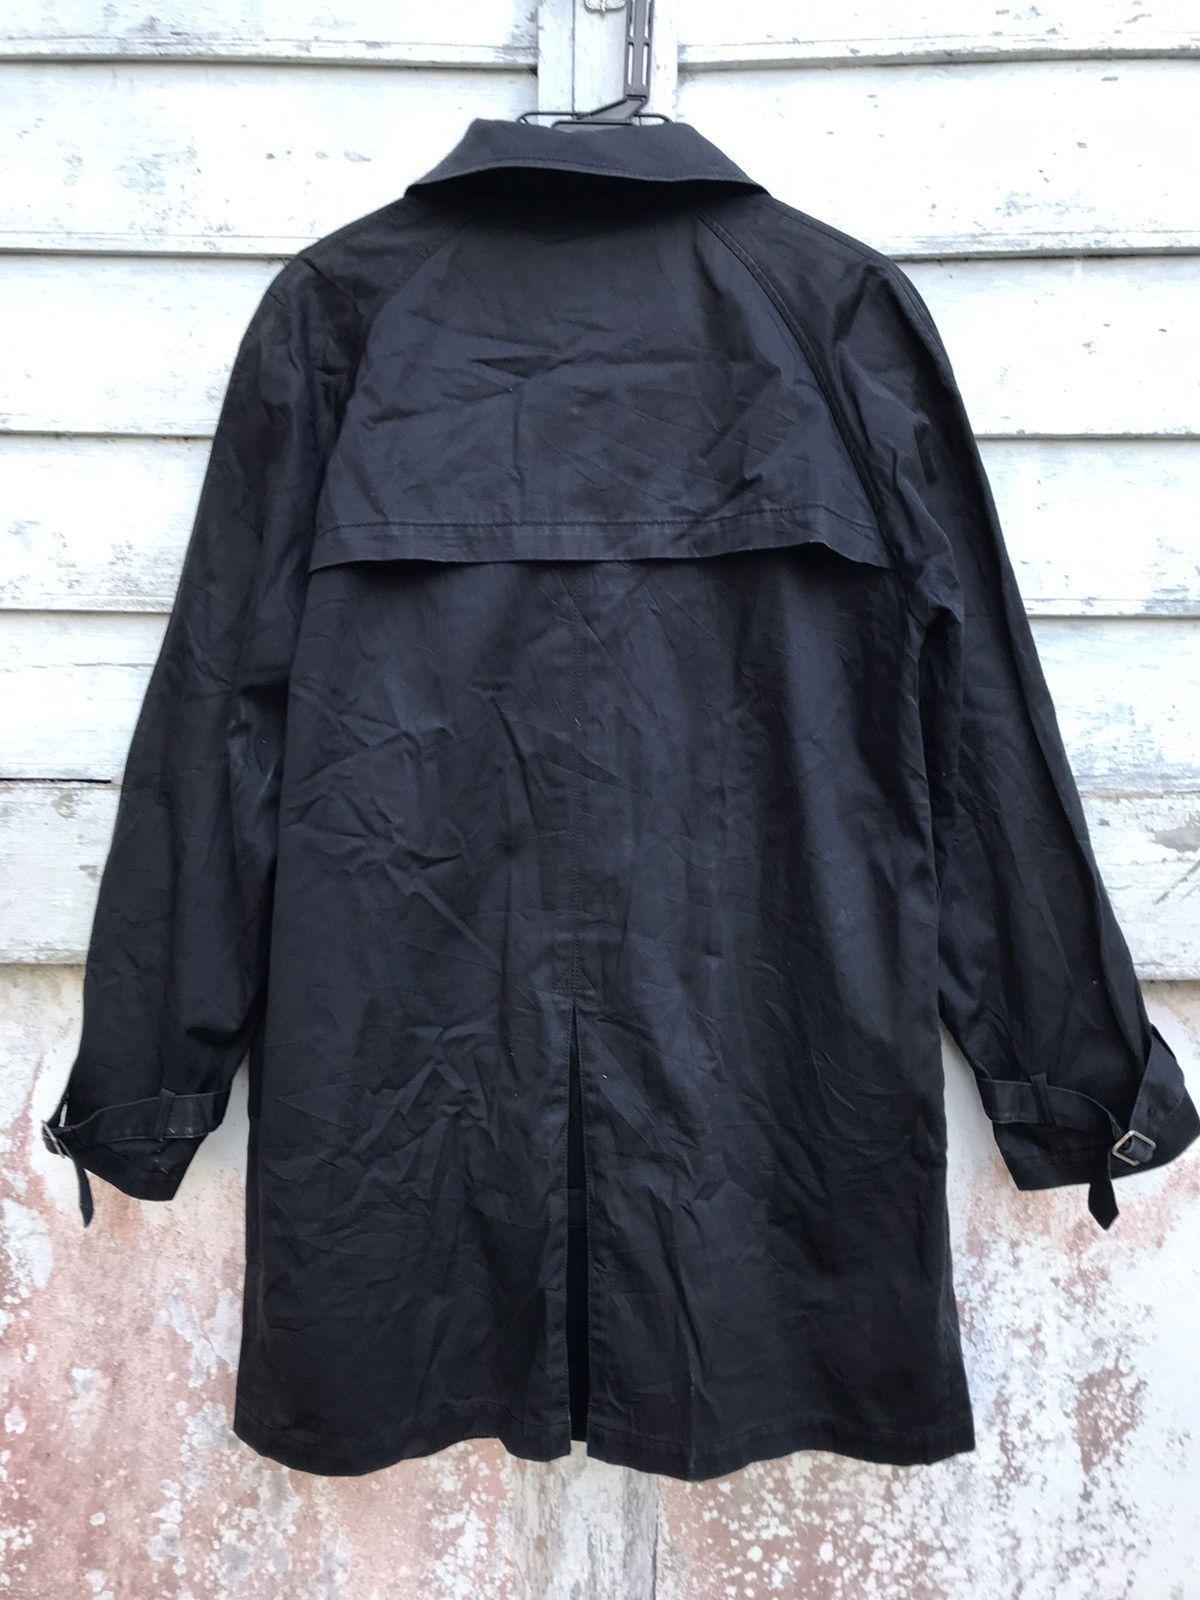 Yohji Yamamoto Against All Risk (A.R.R )Trench Coat - 5